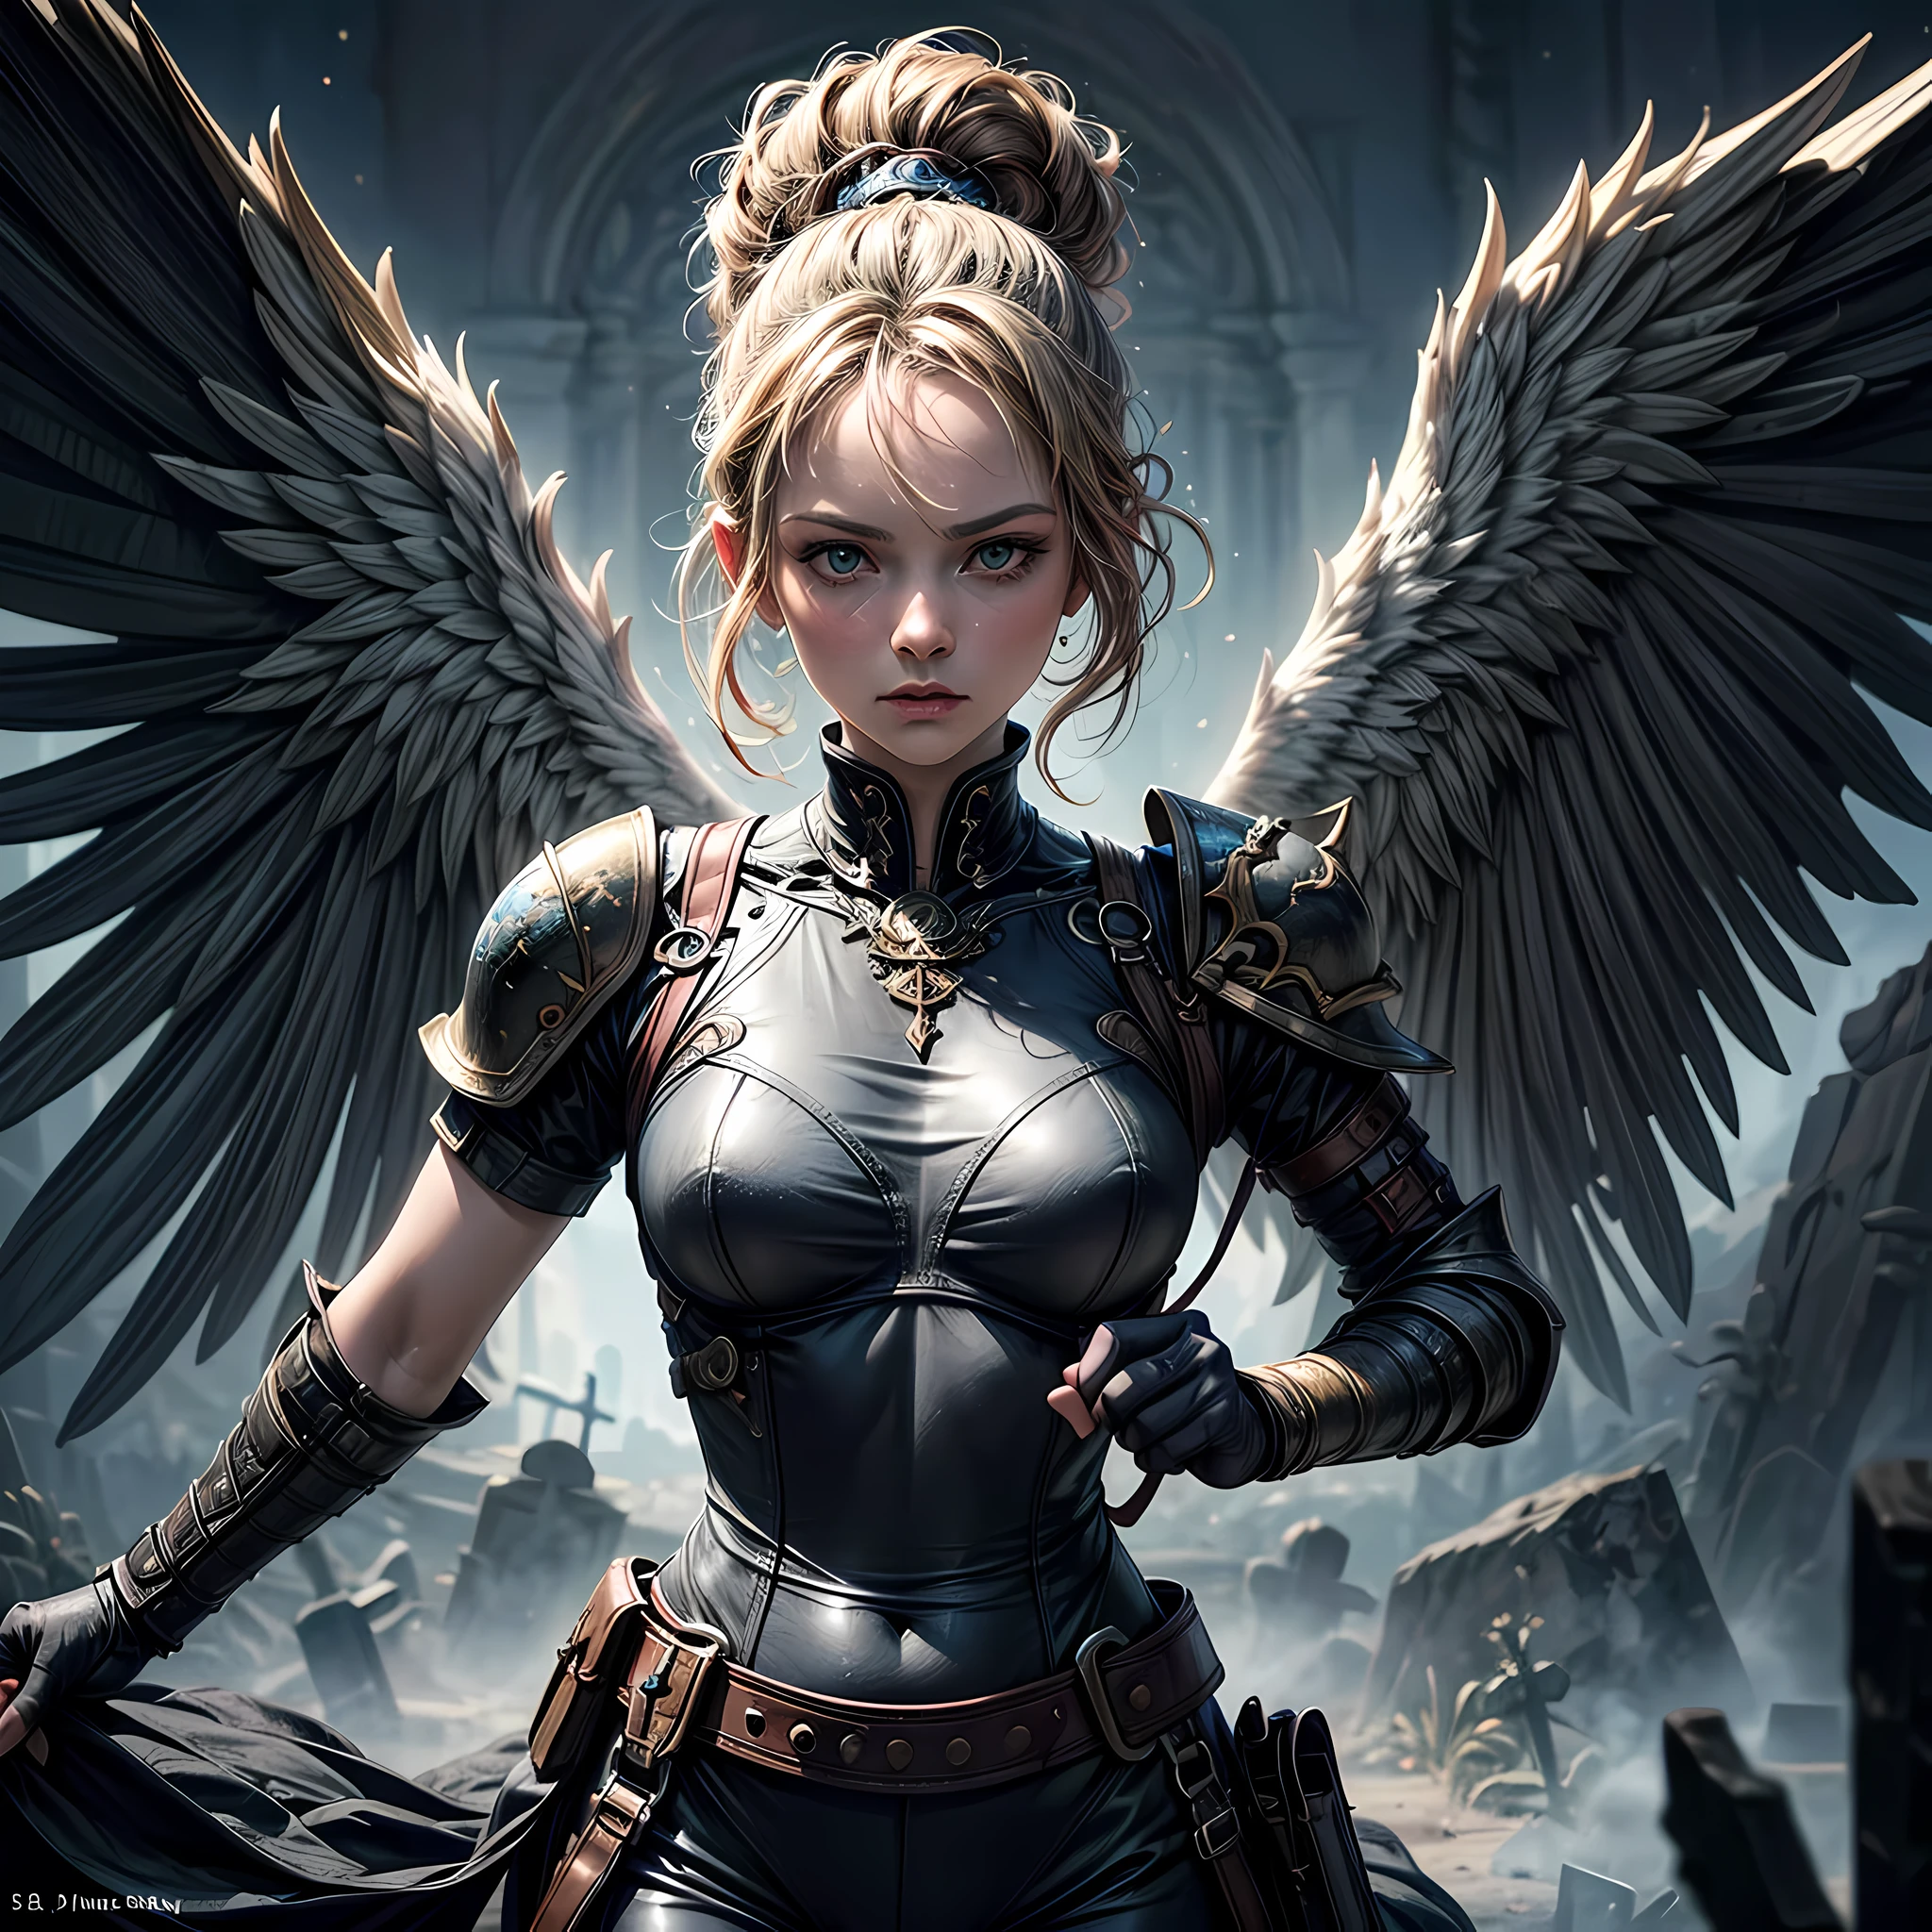 16K, ultra detailed, masterpiece, best quality, (extremely detailed), arafed, dnd art, portrait, full body, aasimar, female, (Masterpiece 1.3, intense details), female, paladin, holy warrior fighting undead (Masterpiece 1.3, intense details) large angelic wings, white angelic wings spread (Masterpiece 1.3, intense details), dark fantasy cemetery background, moon light, moon, stars, clouds, wearing white armor (Masterpiece 1.3, intense details), holy symbol, armed with sword, short blond hair, masculine, detailed face, (Masterpiece 1.5, best quality), anatomically correct (Masterpiece 1.3, intense details), angel_wings, determined face, god rays, cinematic lighting, glowing light, silhouette, from outside, photorealism, panoramic view  (Masterpiece 1.3, intense details) , Wide-Angle, Ultra-Wide Angle, 8k, highres, best quality, high details